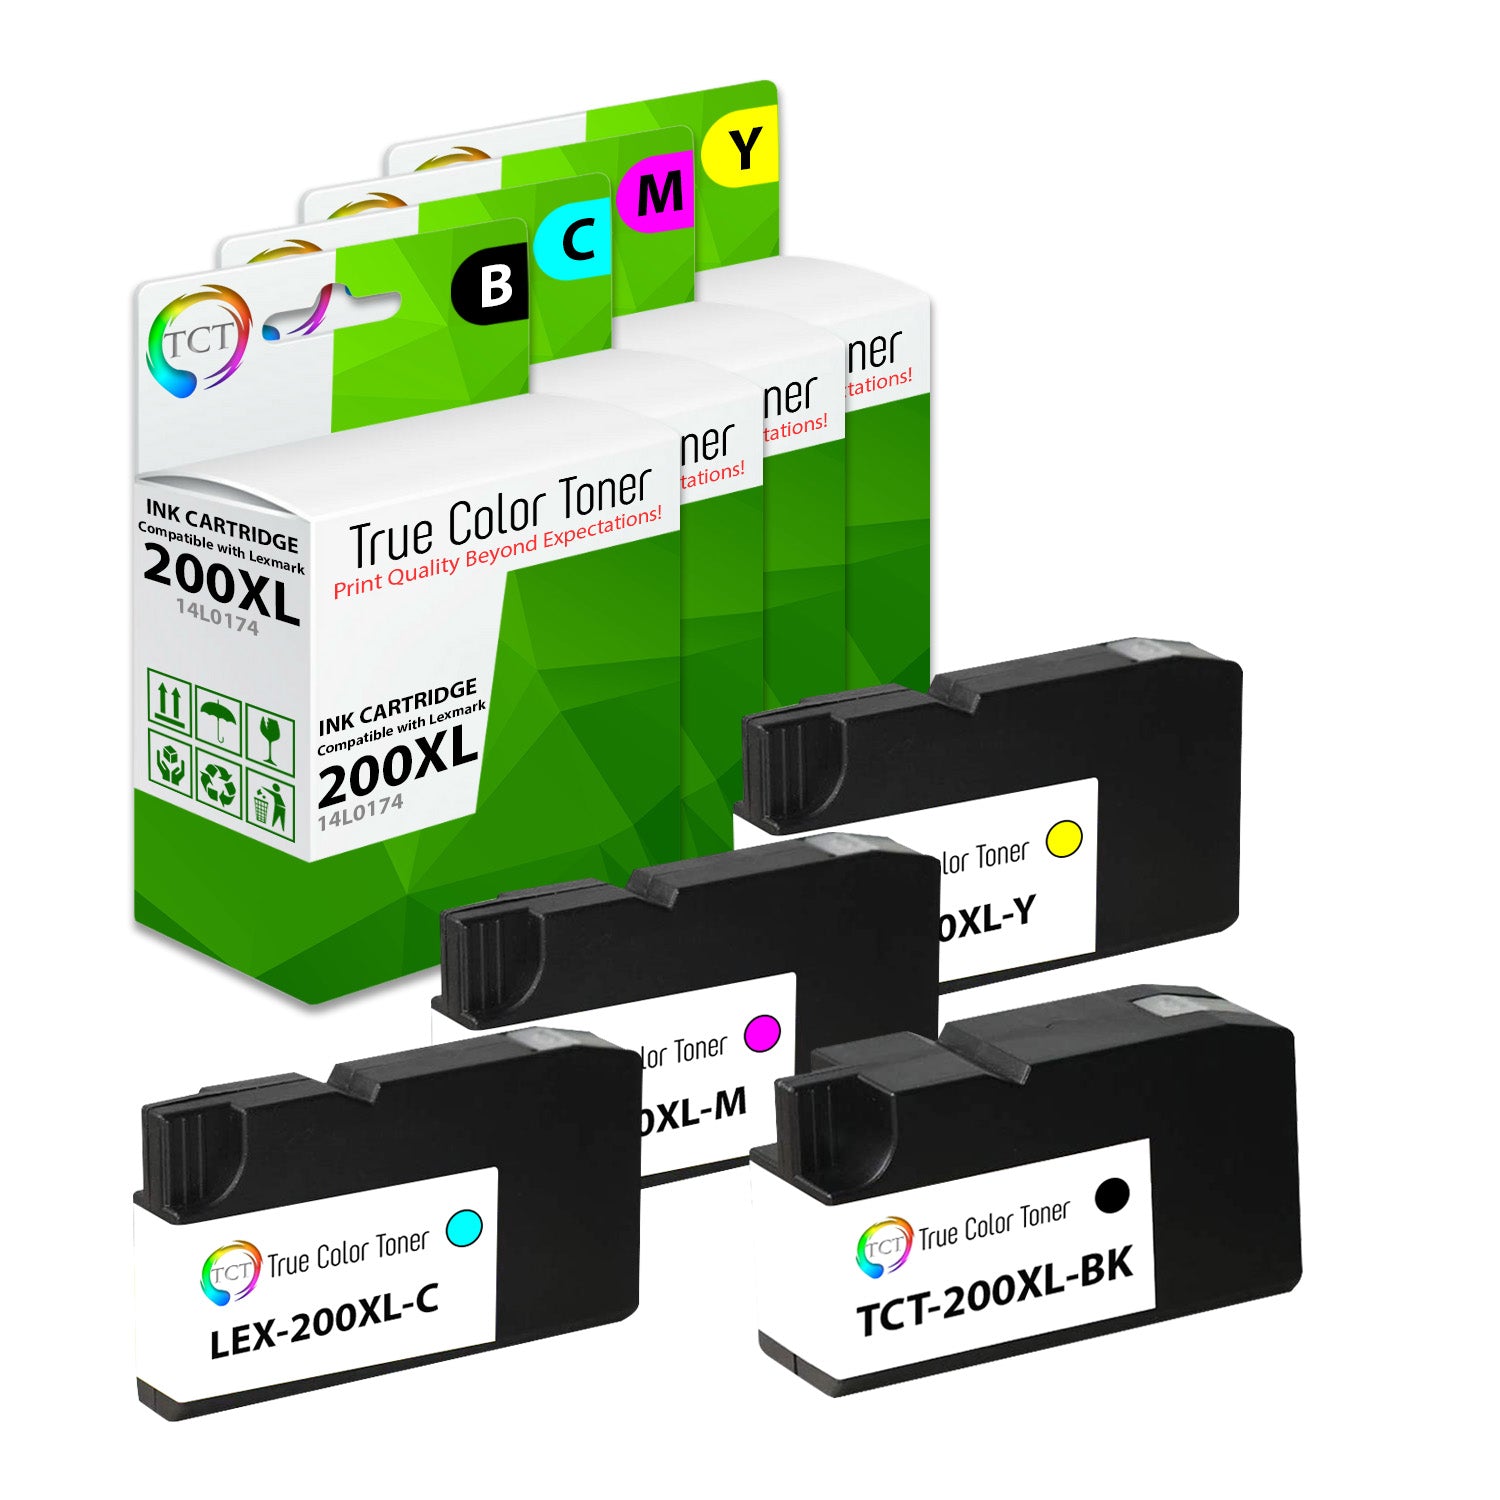 TCT Remanufactured HY Ink Cartridge Replacement for the Lexmark 200XL Series - 4 Pack (B, C, M, Y)